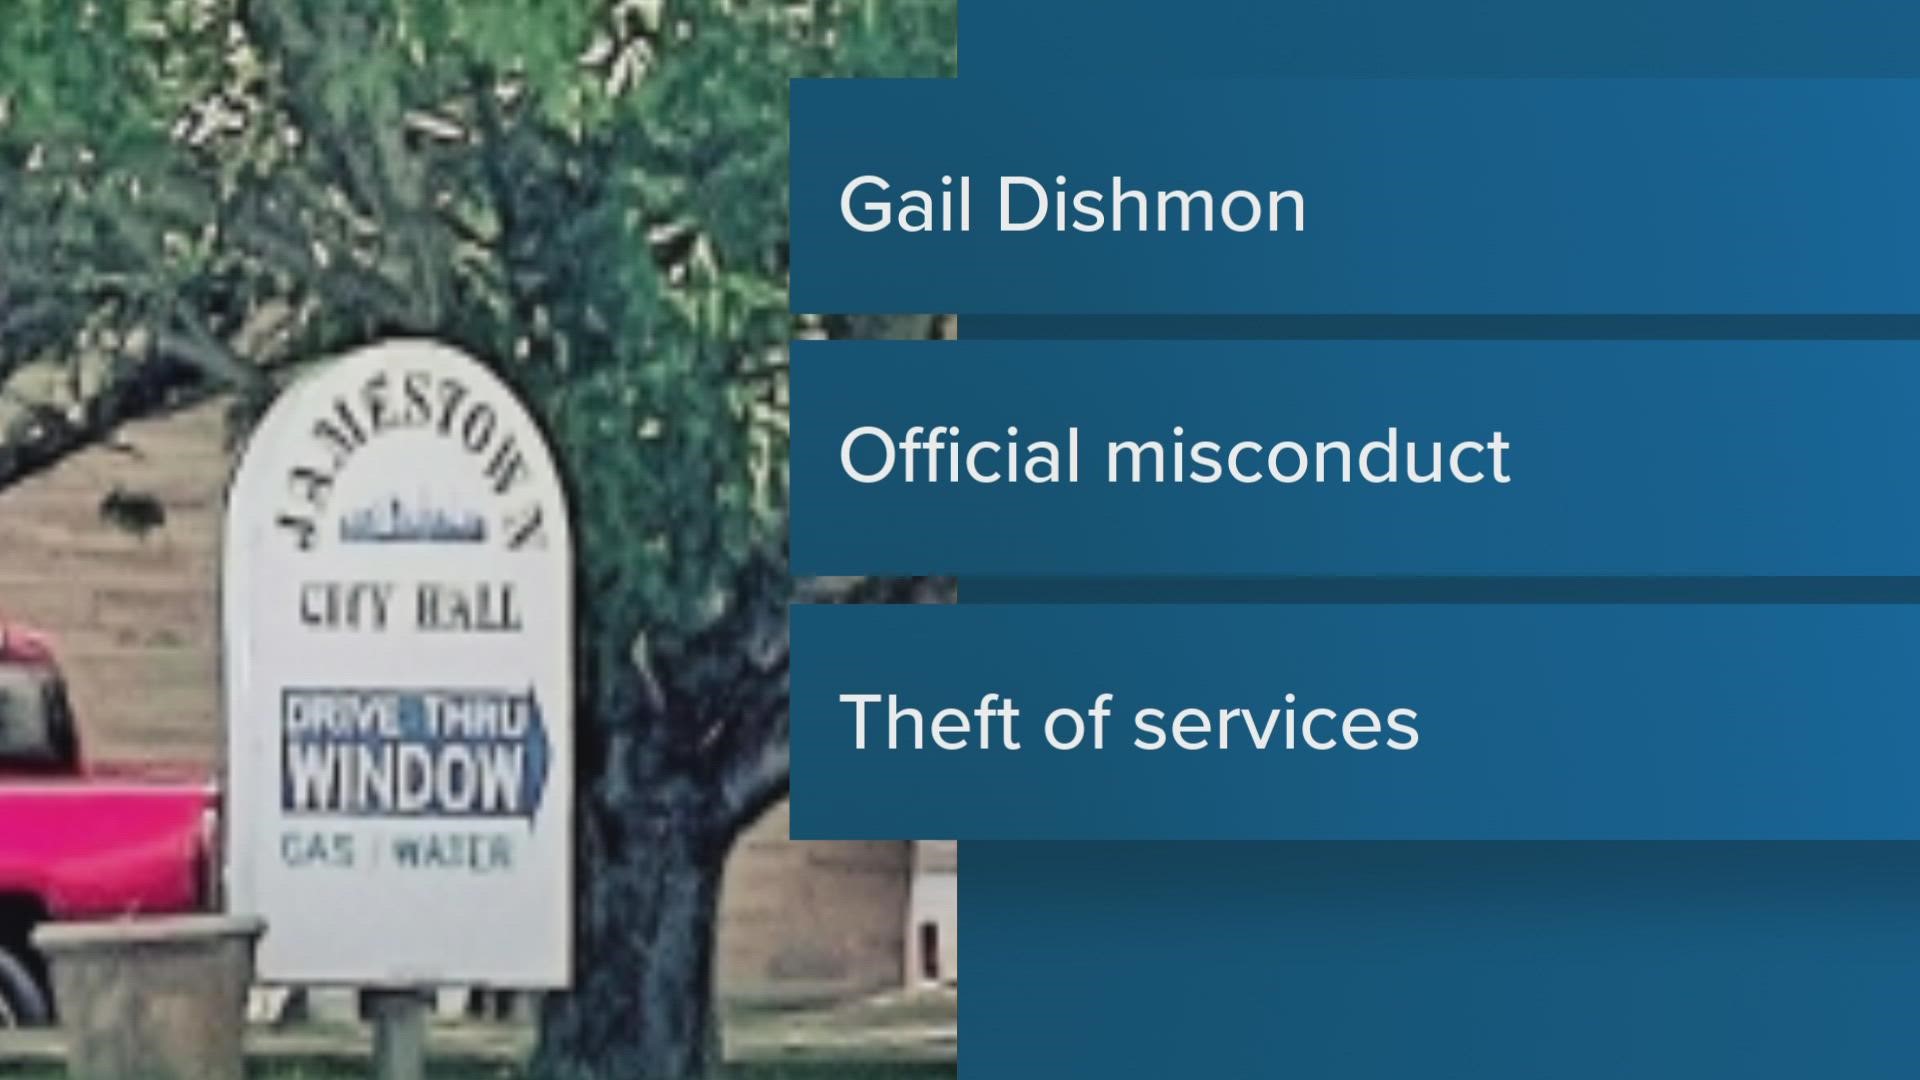 Patricia Dishmon has been indicted on one count of theft of service over $1,000 and one count of official misconduct, the TN Comptroller of the Treasury said.